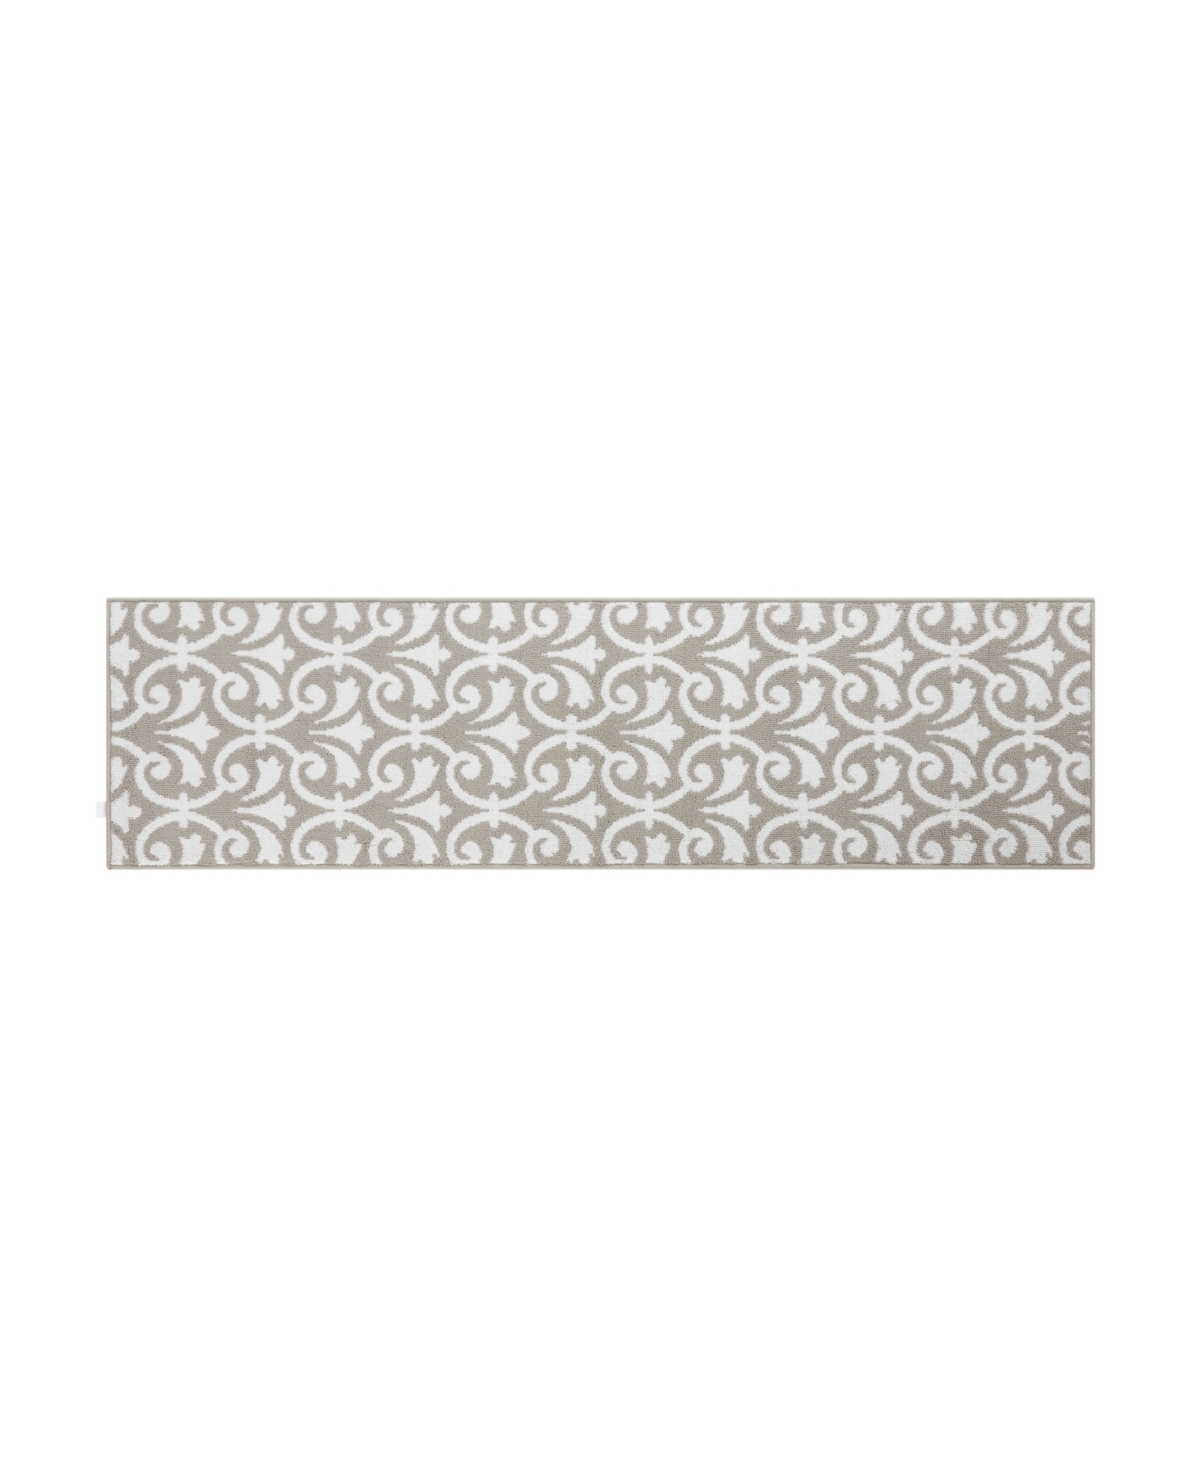 Jean Pierre Karb Floral Scroll Tufted- Machine Washable Runner Rug, 26" X 72" In Light Gray And White